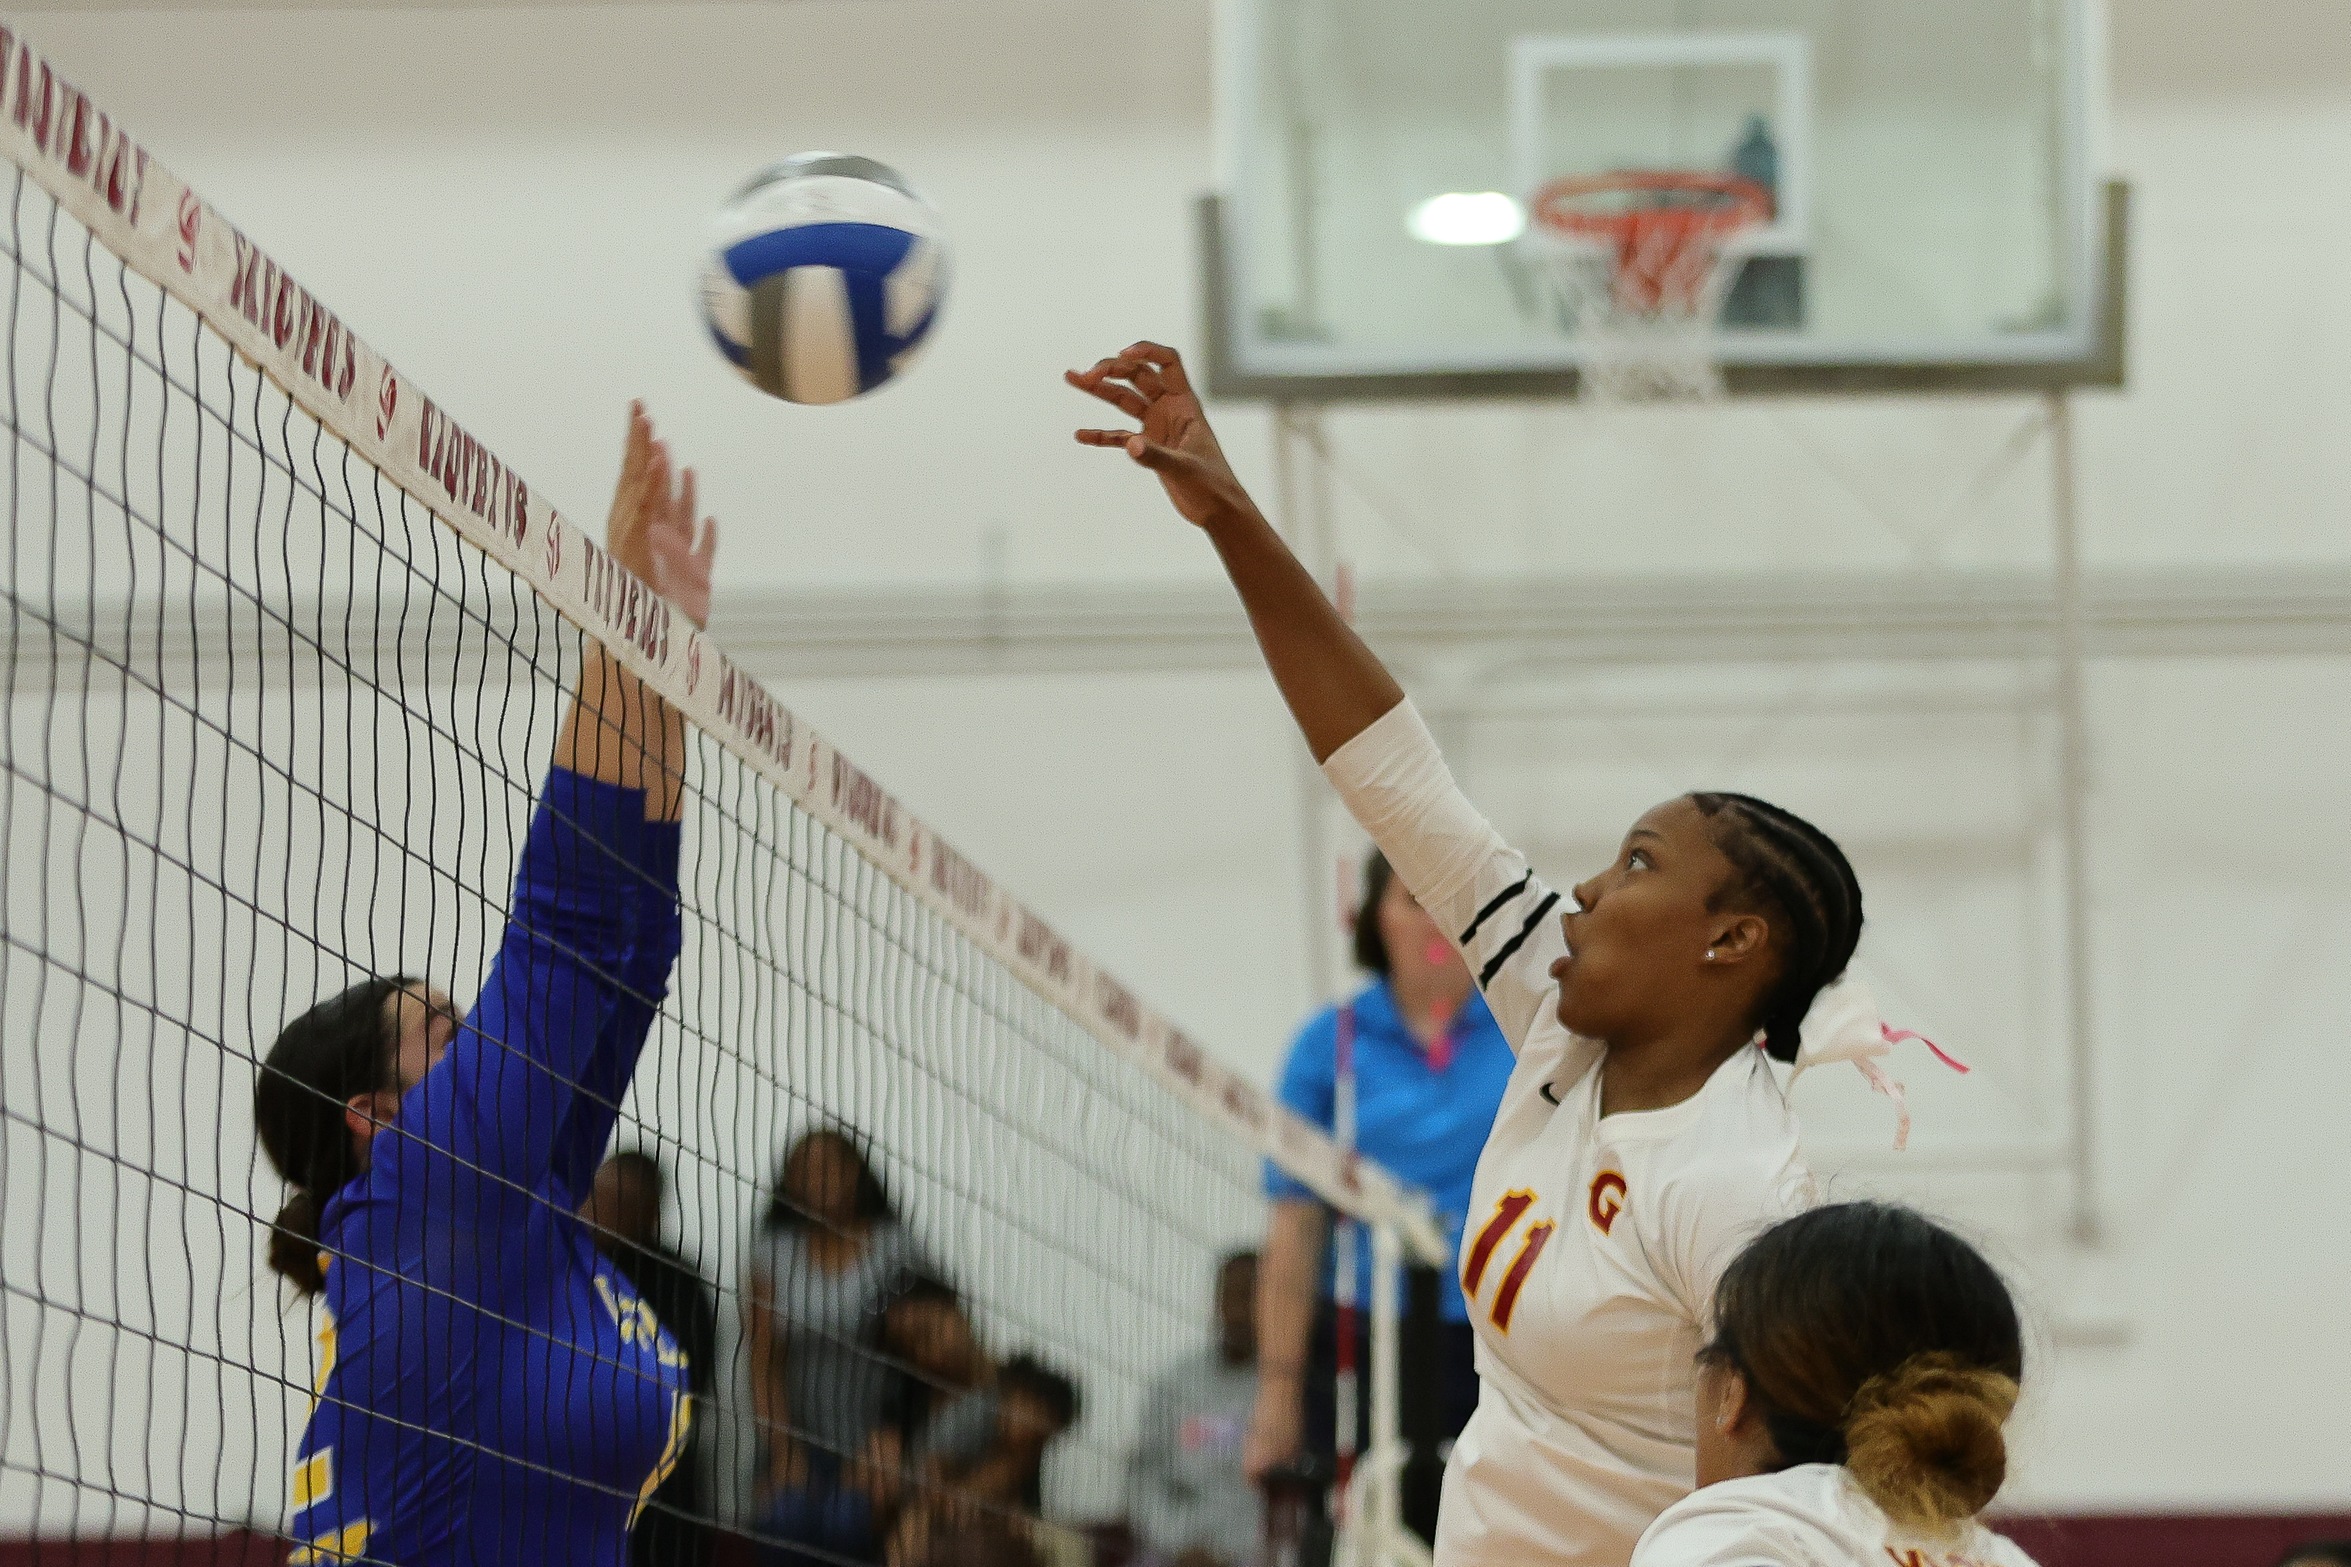 GCC Women's Volleyball win third straight, now 3-1 in WSC South and tied for second place